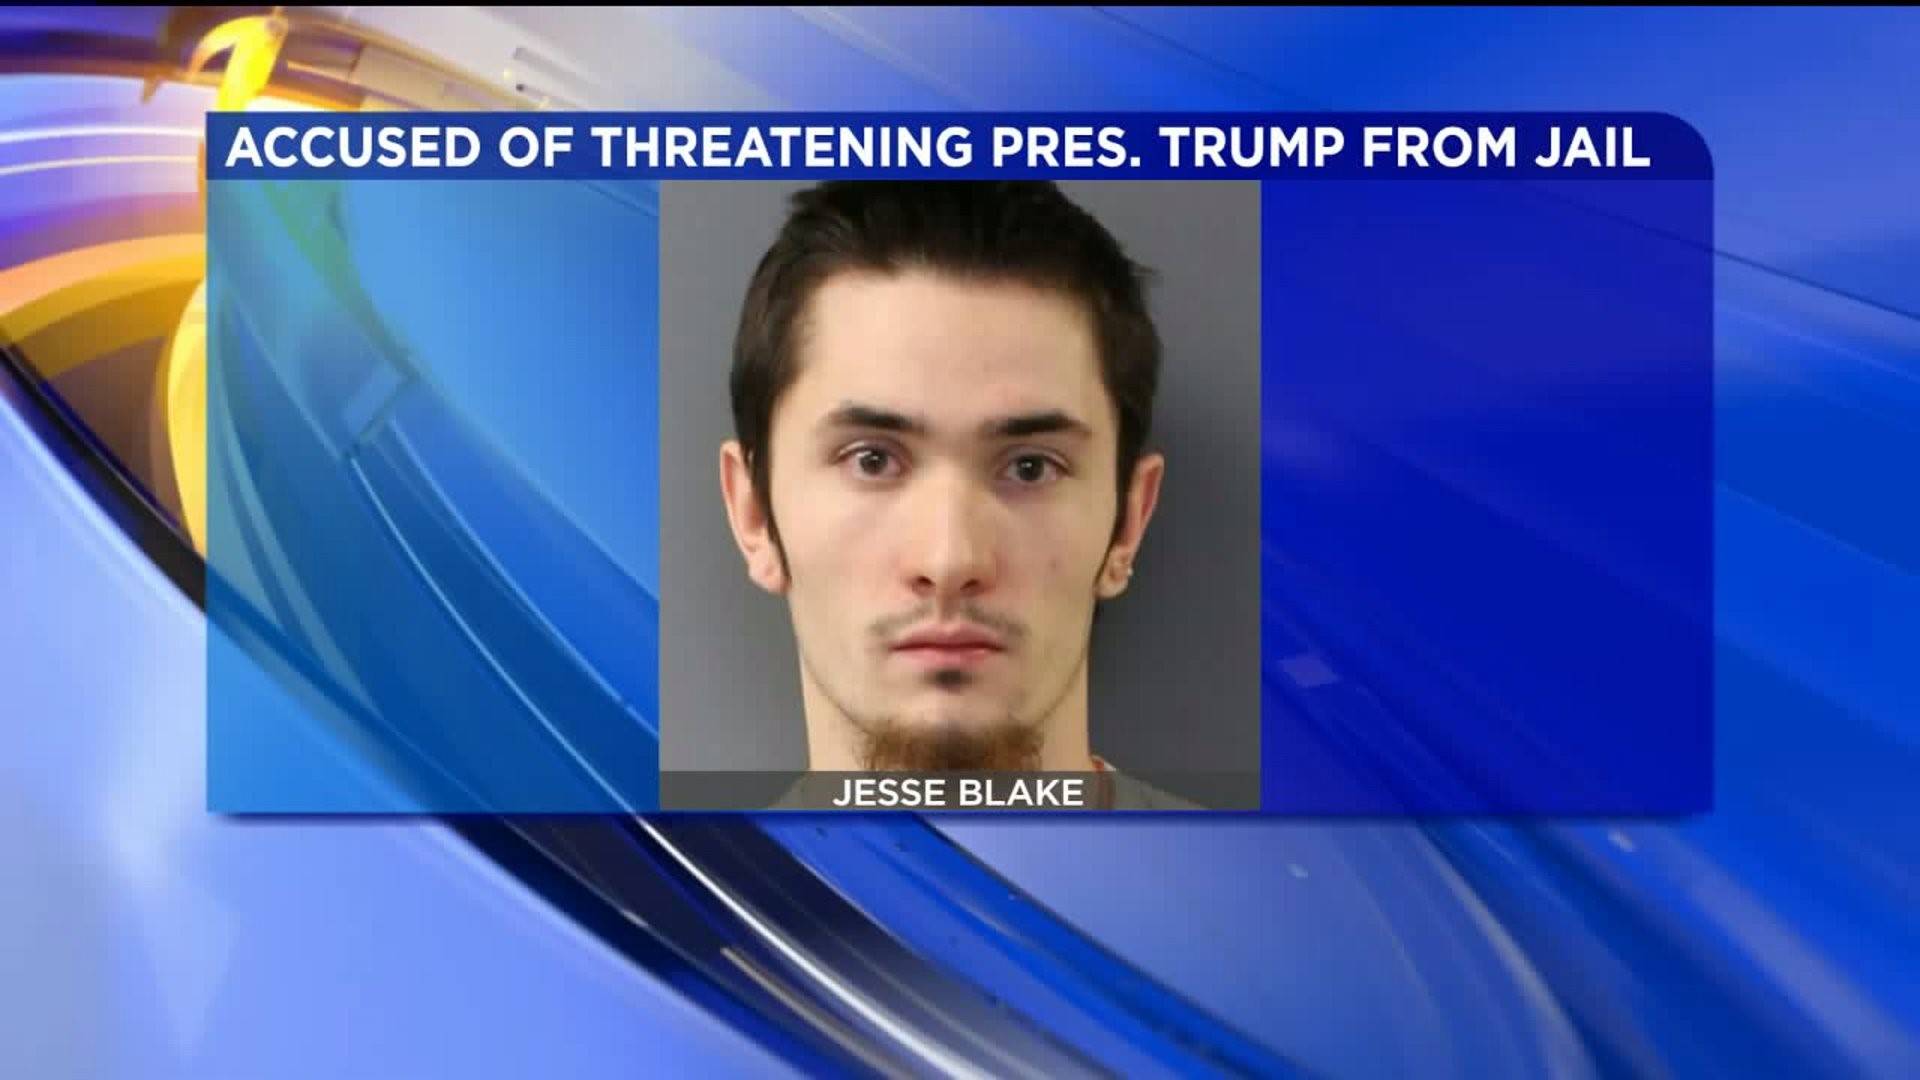 Man Locked Up in Bradford County Accused of Threats Against Pres. Trump